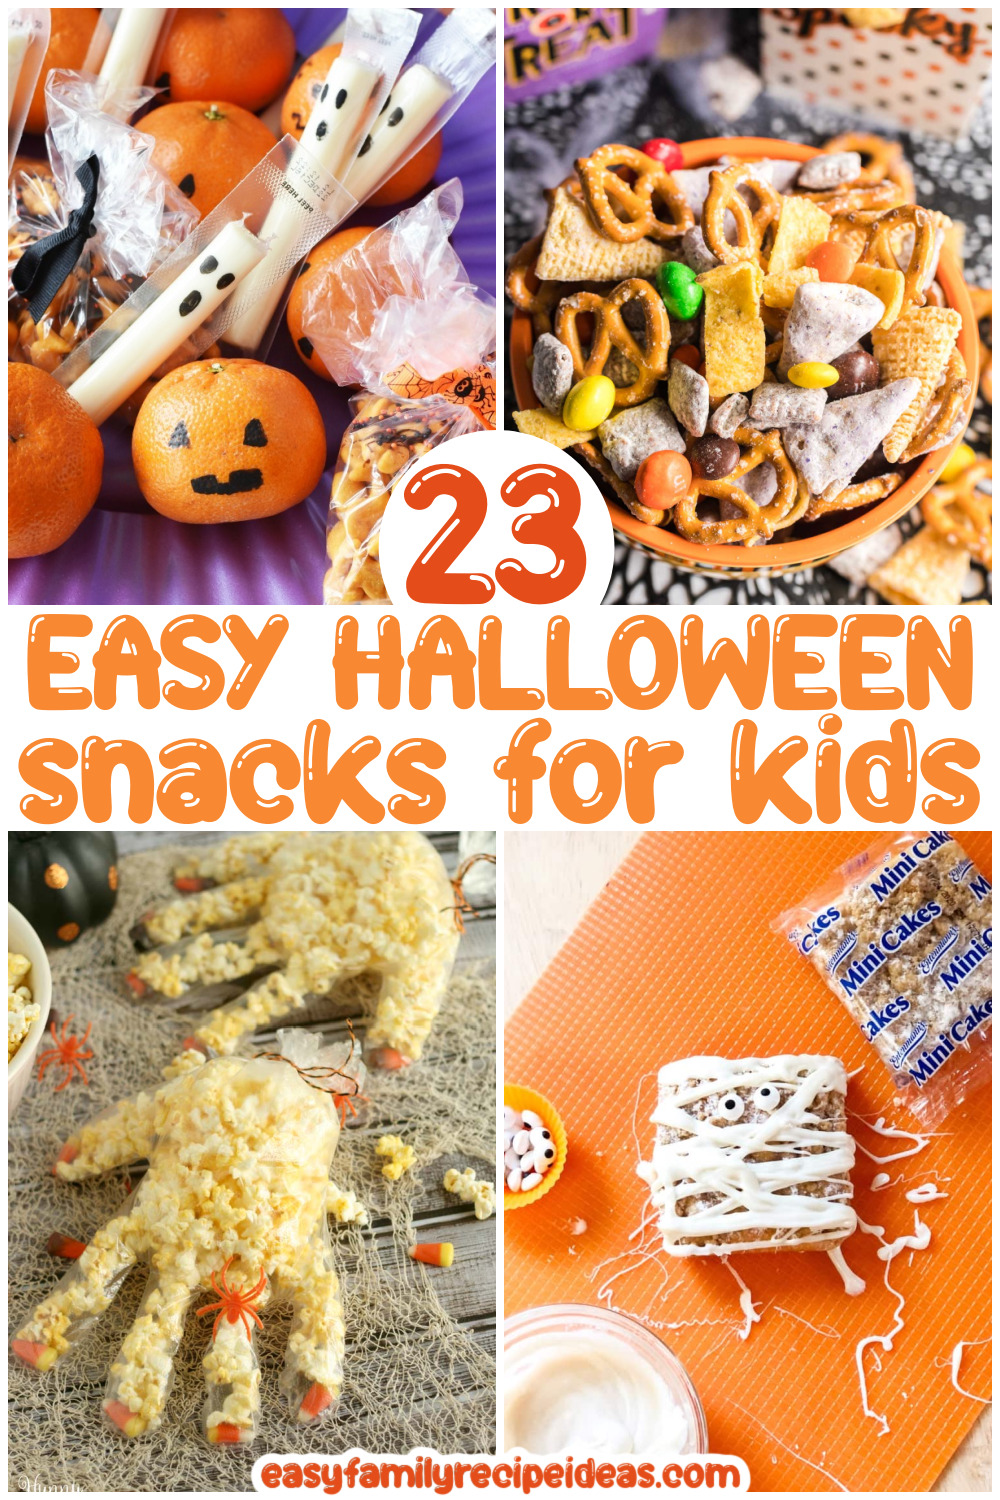 Whether you are looking for something healthy to eat, something sweet, or something that's fun and festive these easy fall snack ideas will help you make snack time the best food of the day. From caramel and apples to pumpkin spice recipes these fun fall snack ideas will make everyone in your family happy.